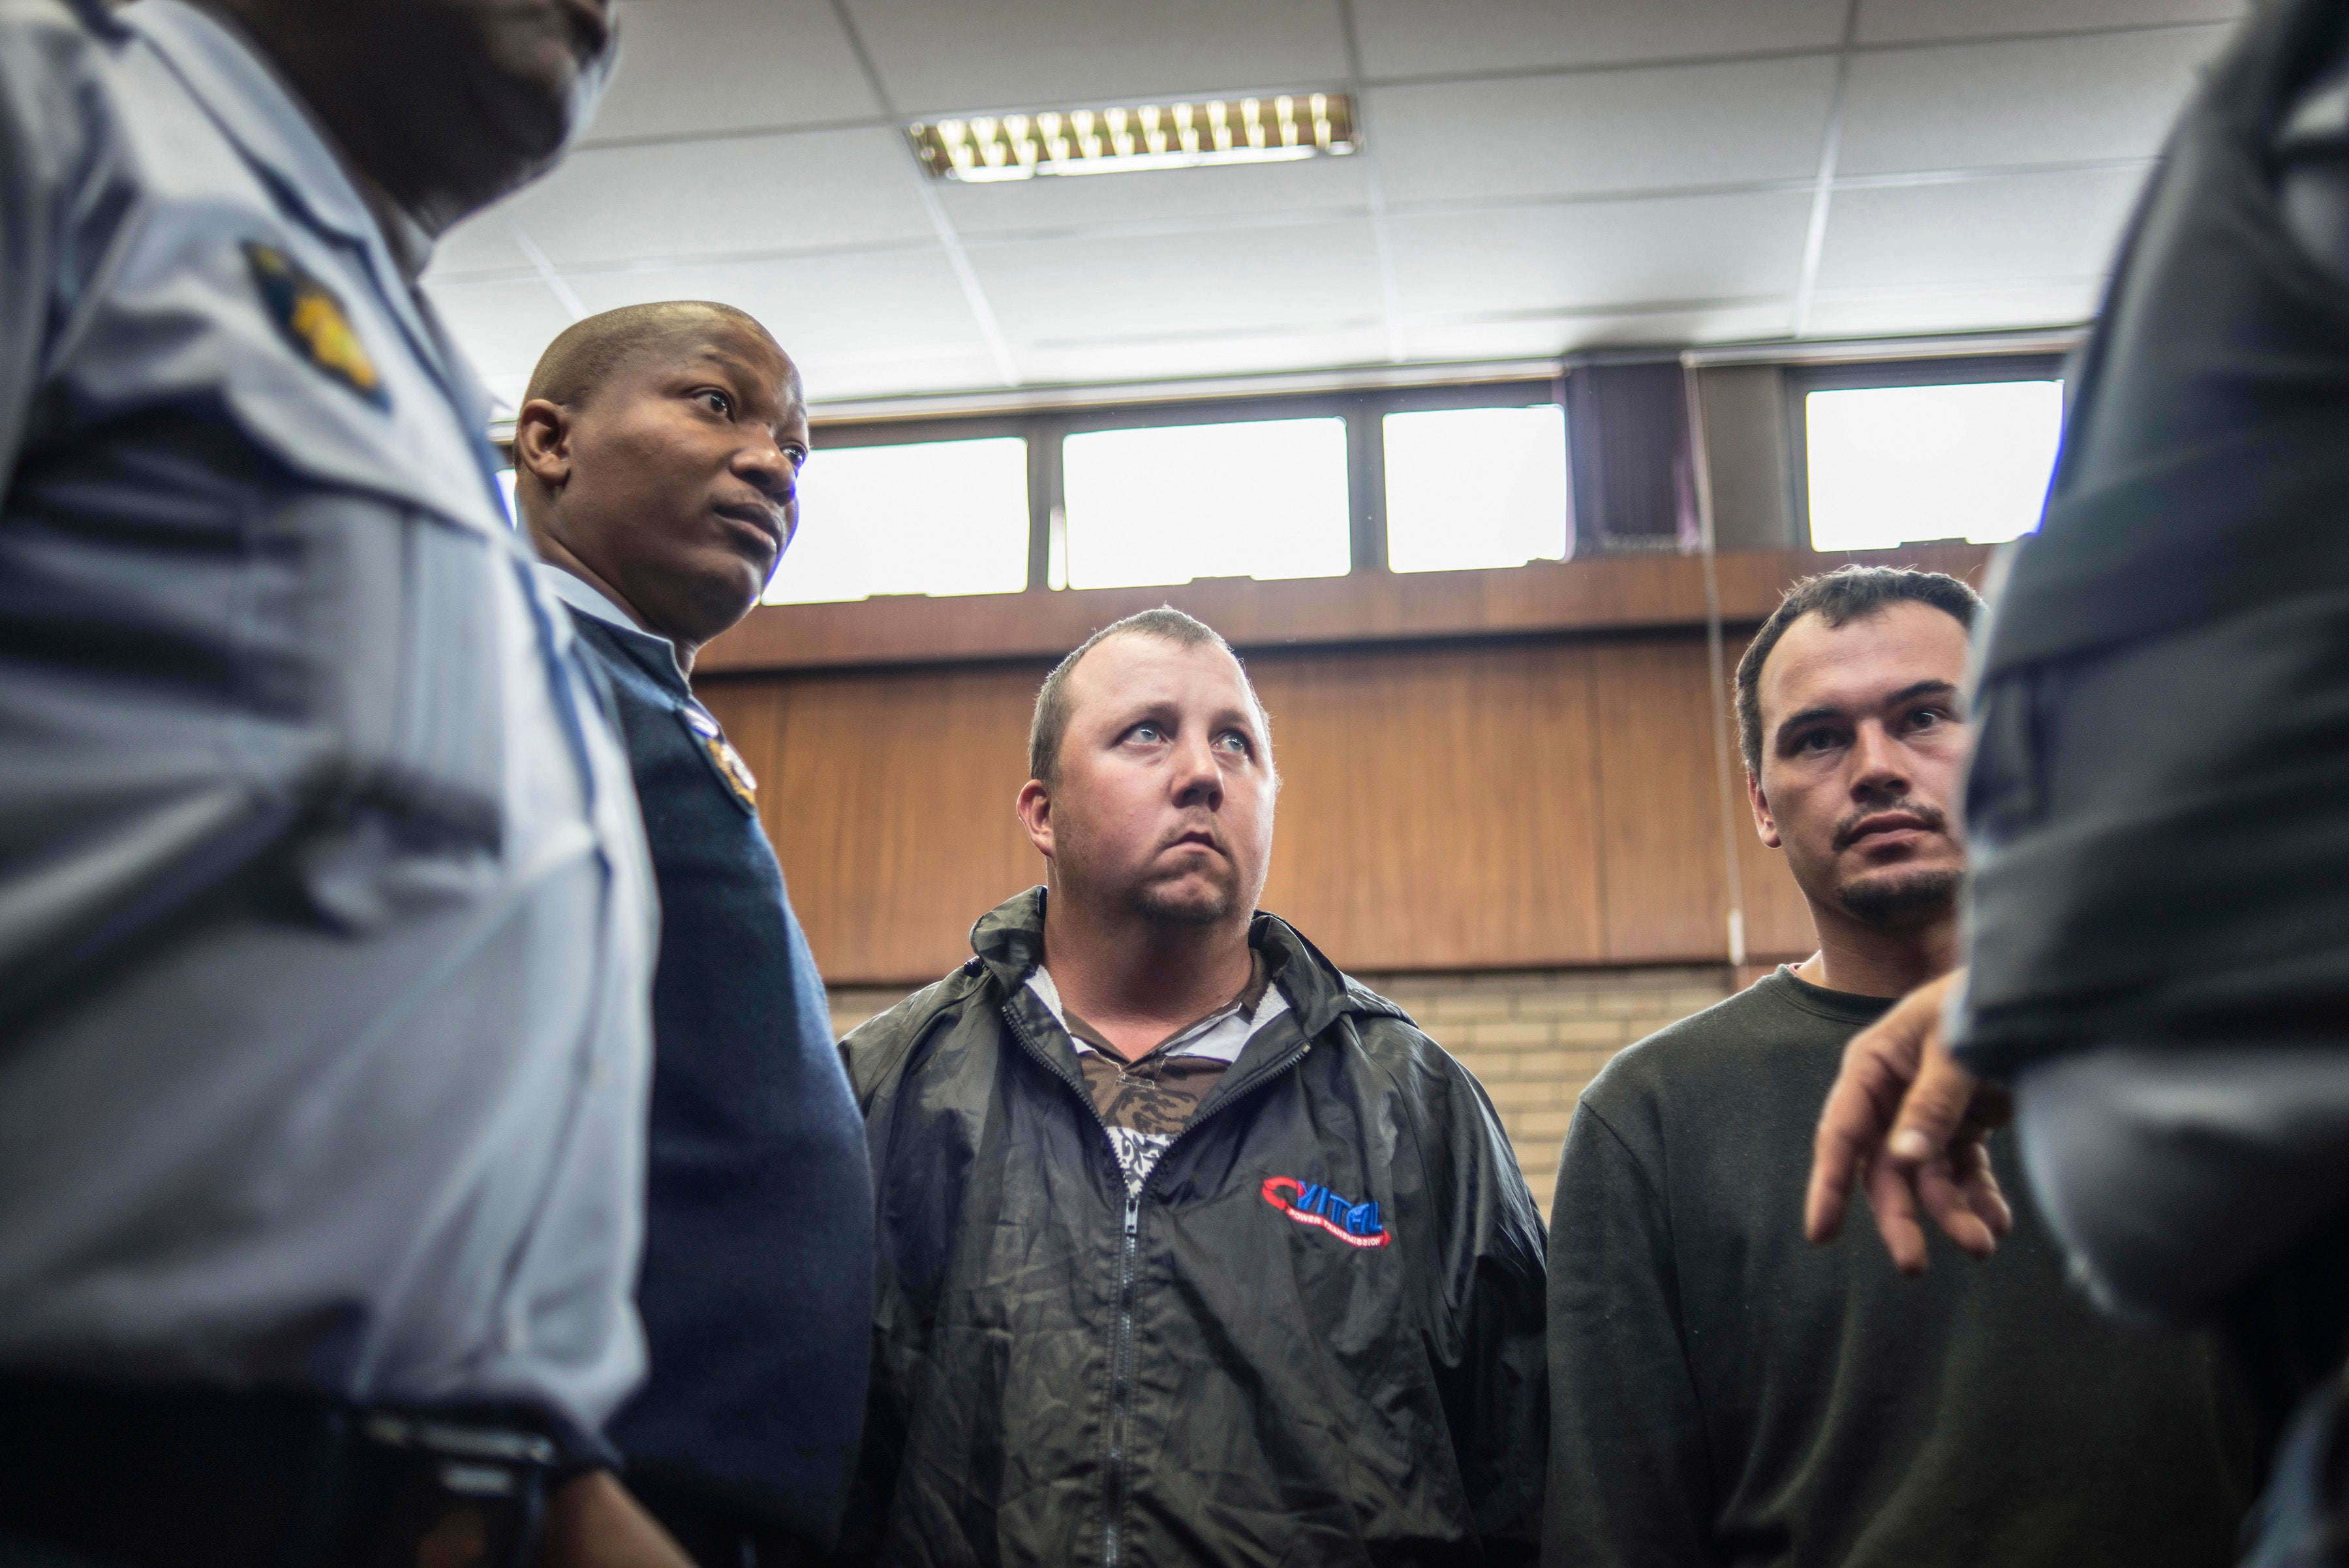 Two White South Africans Arrested After Forcing Black Man Into Coffin
